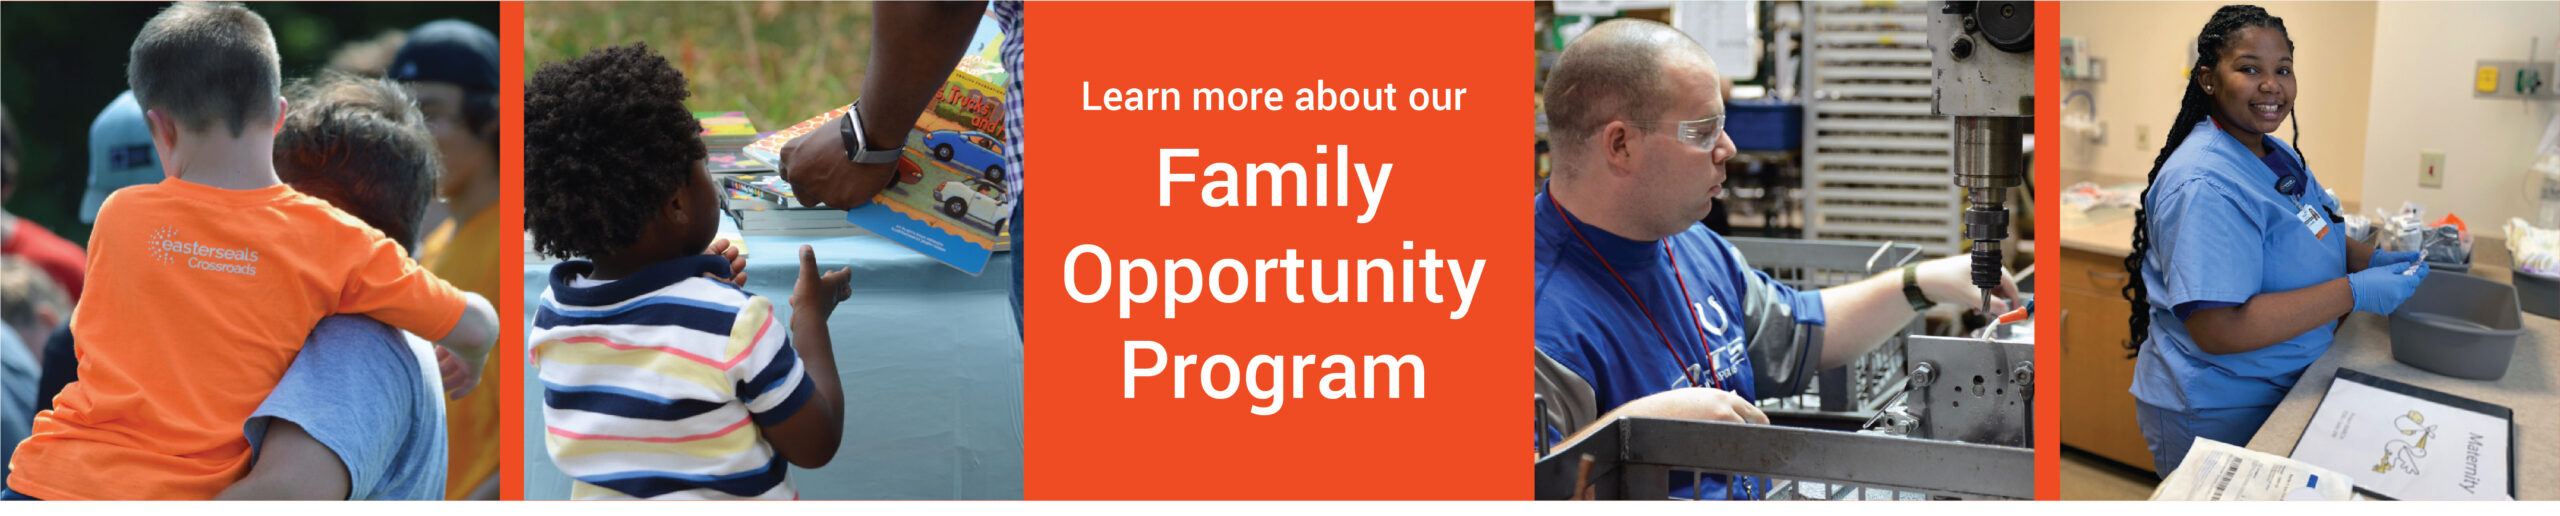 learn more about our Family Opportunity Program